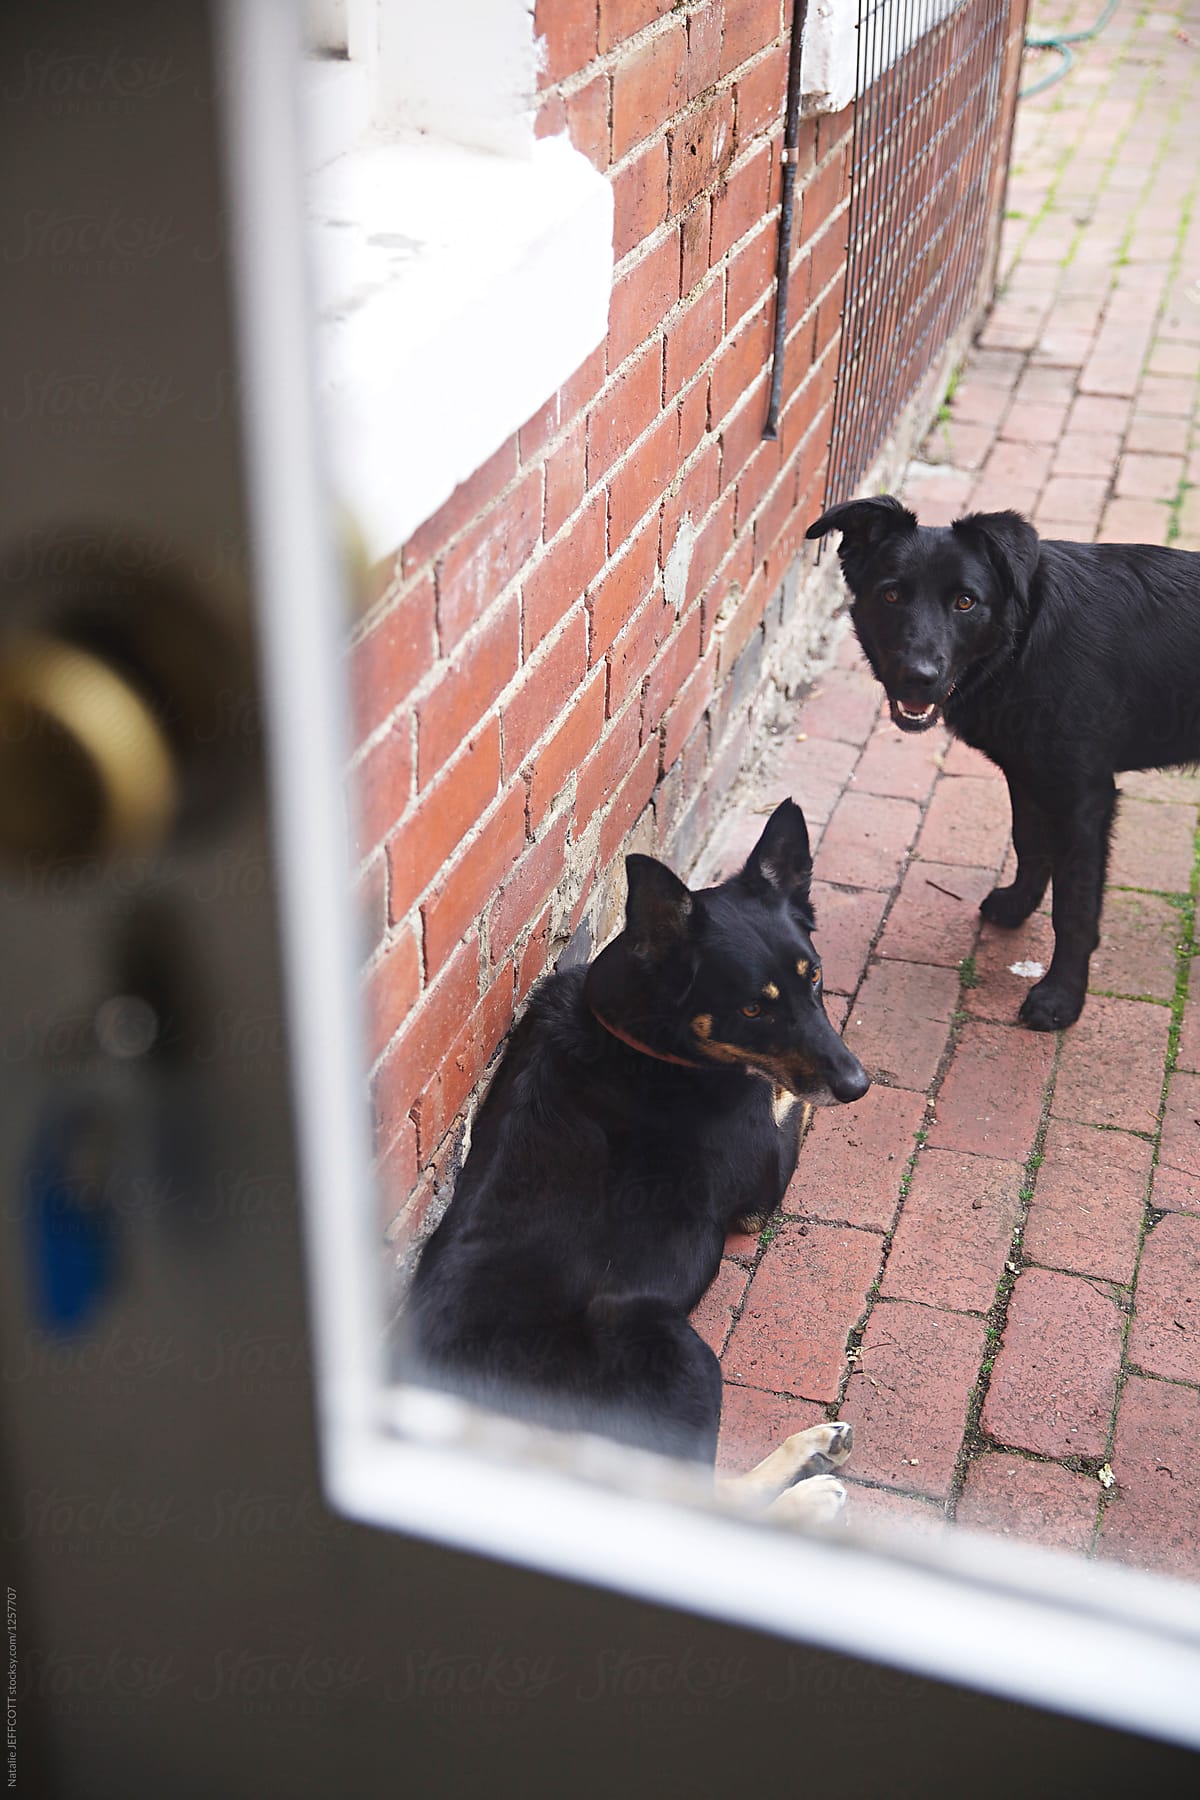 2 Pet dogs waiting at back door to come inside